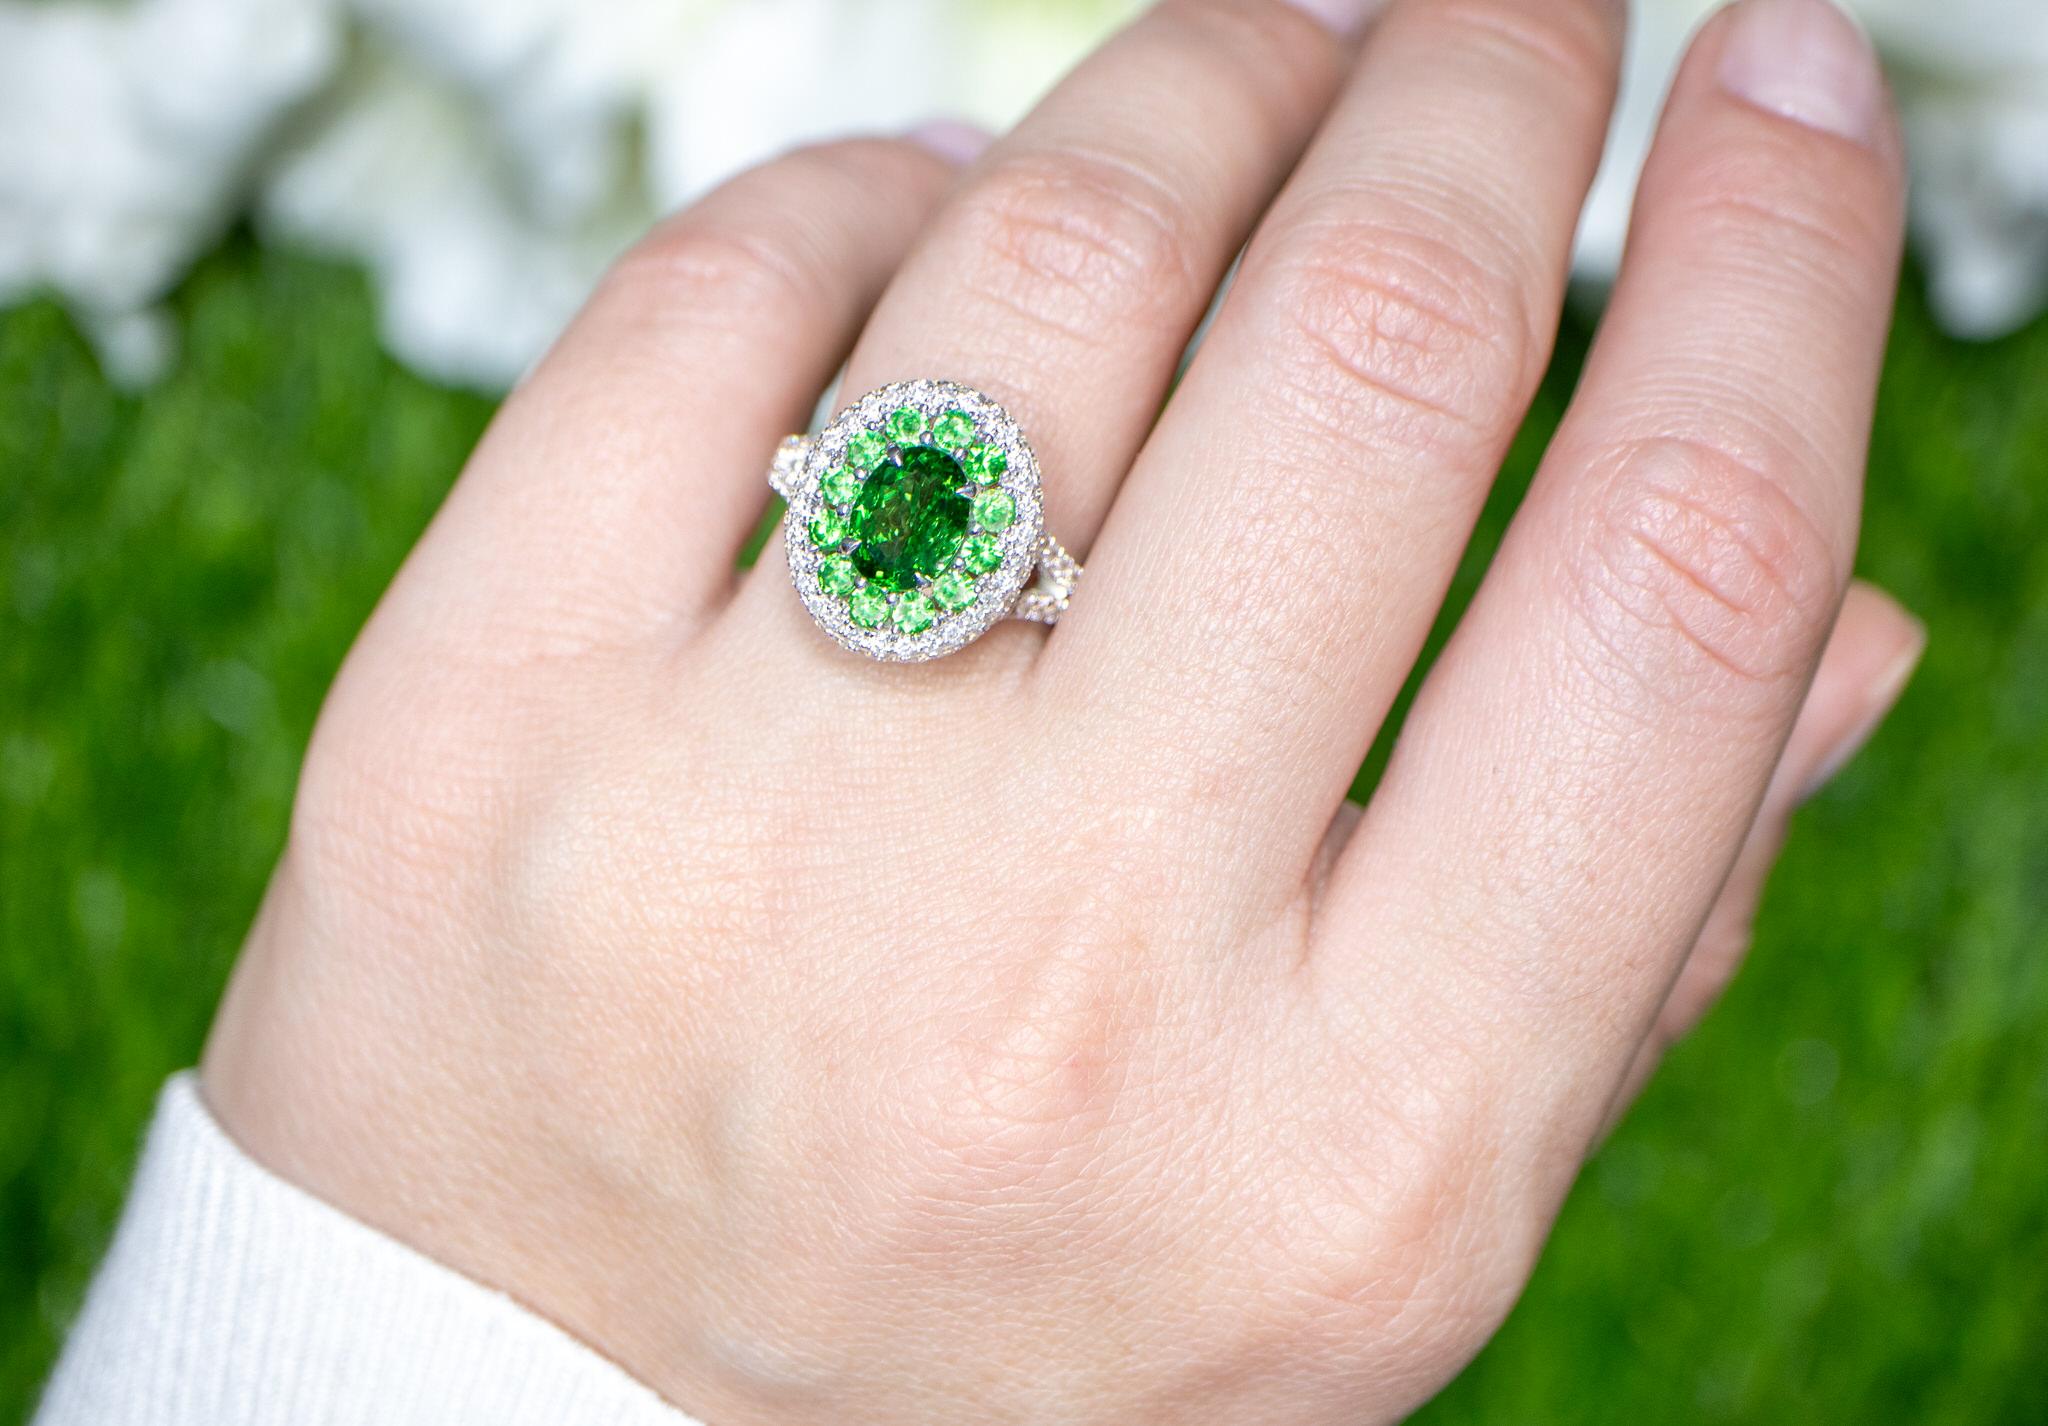 It comes with the Gemological Appraisal by GIA GG/AJP
All Gemstones are Natural
Tsavorites = 2.15 Carats
Diamonds = 0.92 Carats
Metal: 18K White Gold
Ring Size: 6.5* US
*It can be resized complimentary